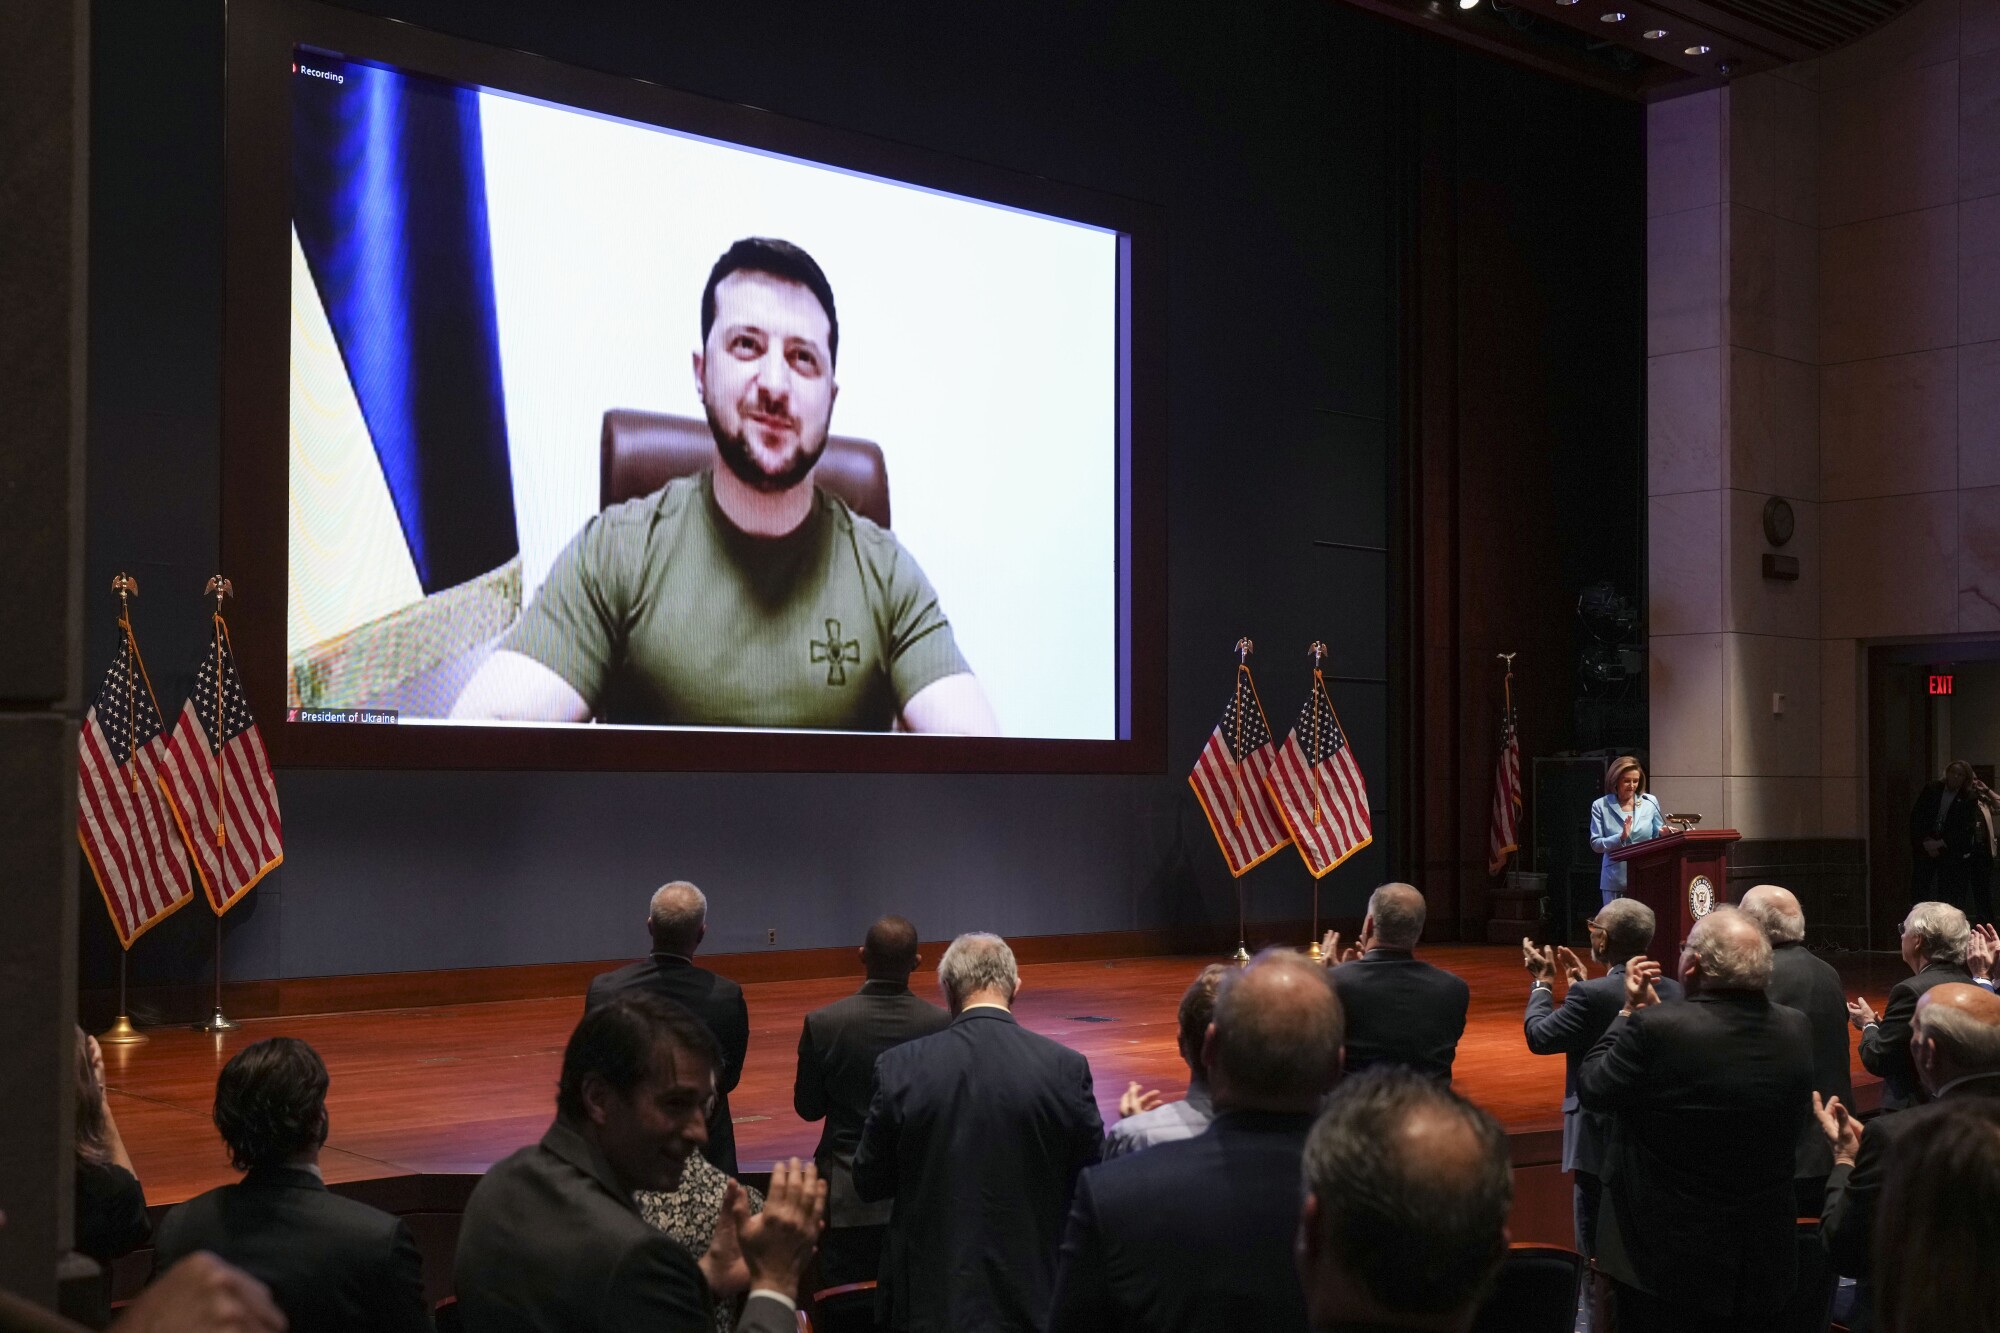 Ukraine President Volodymyr Zelensky looms large on a video screen as the US Congress gives him a standing ovation.